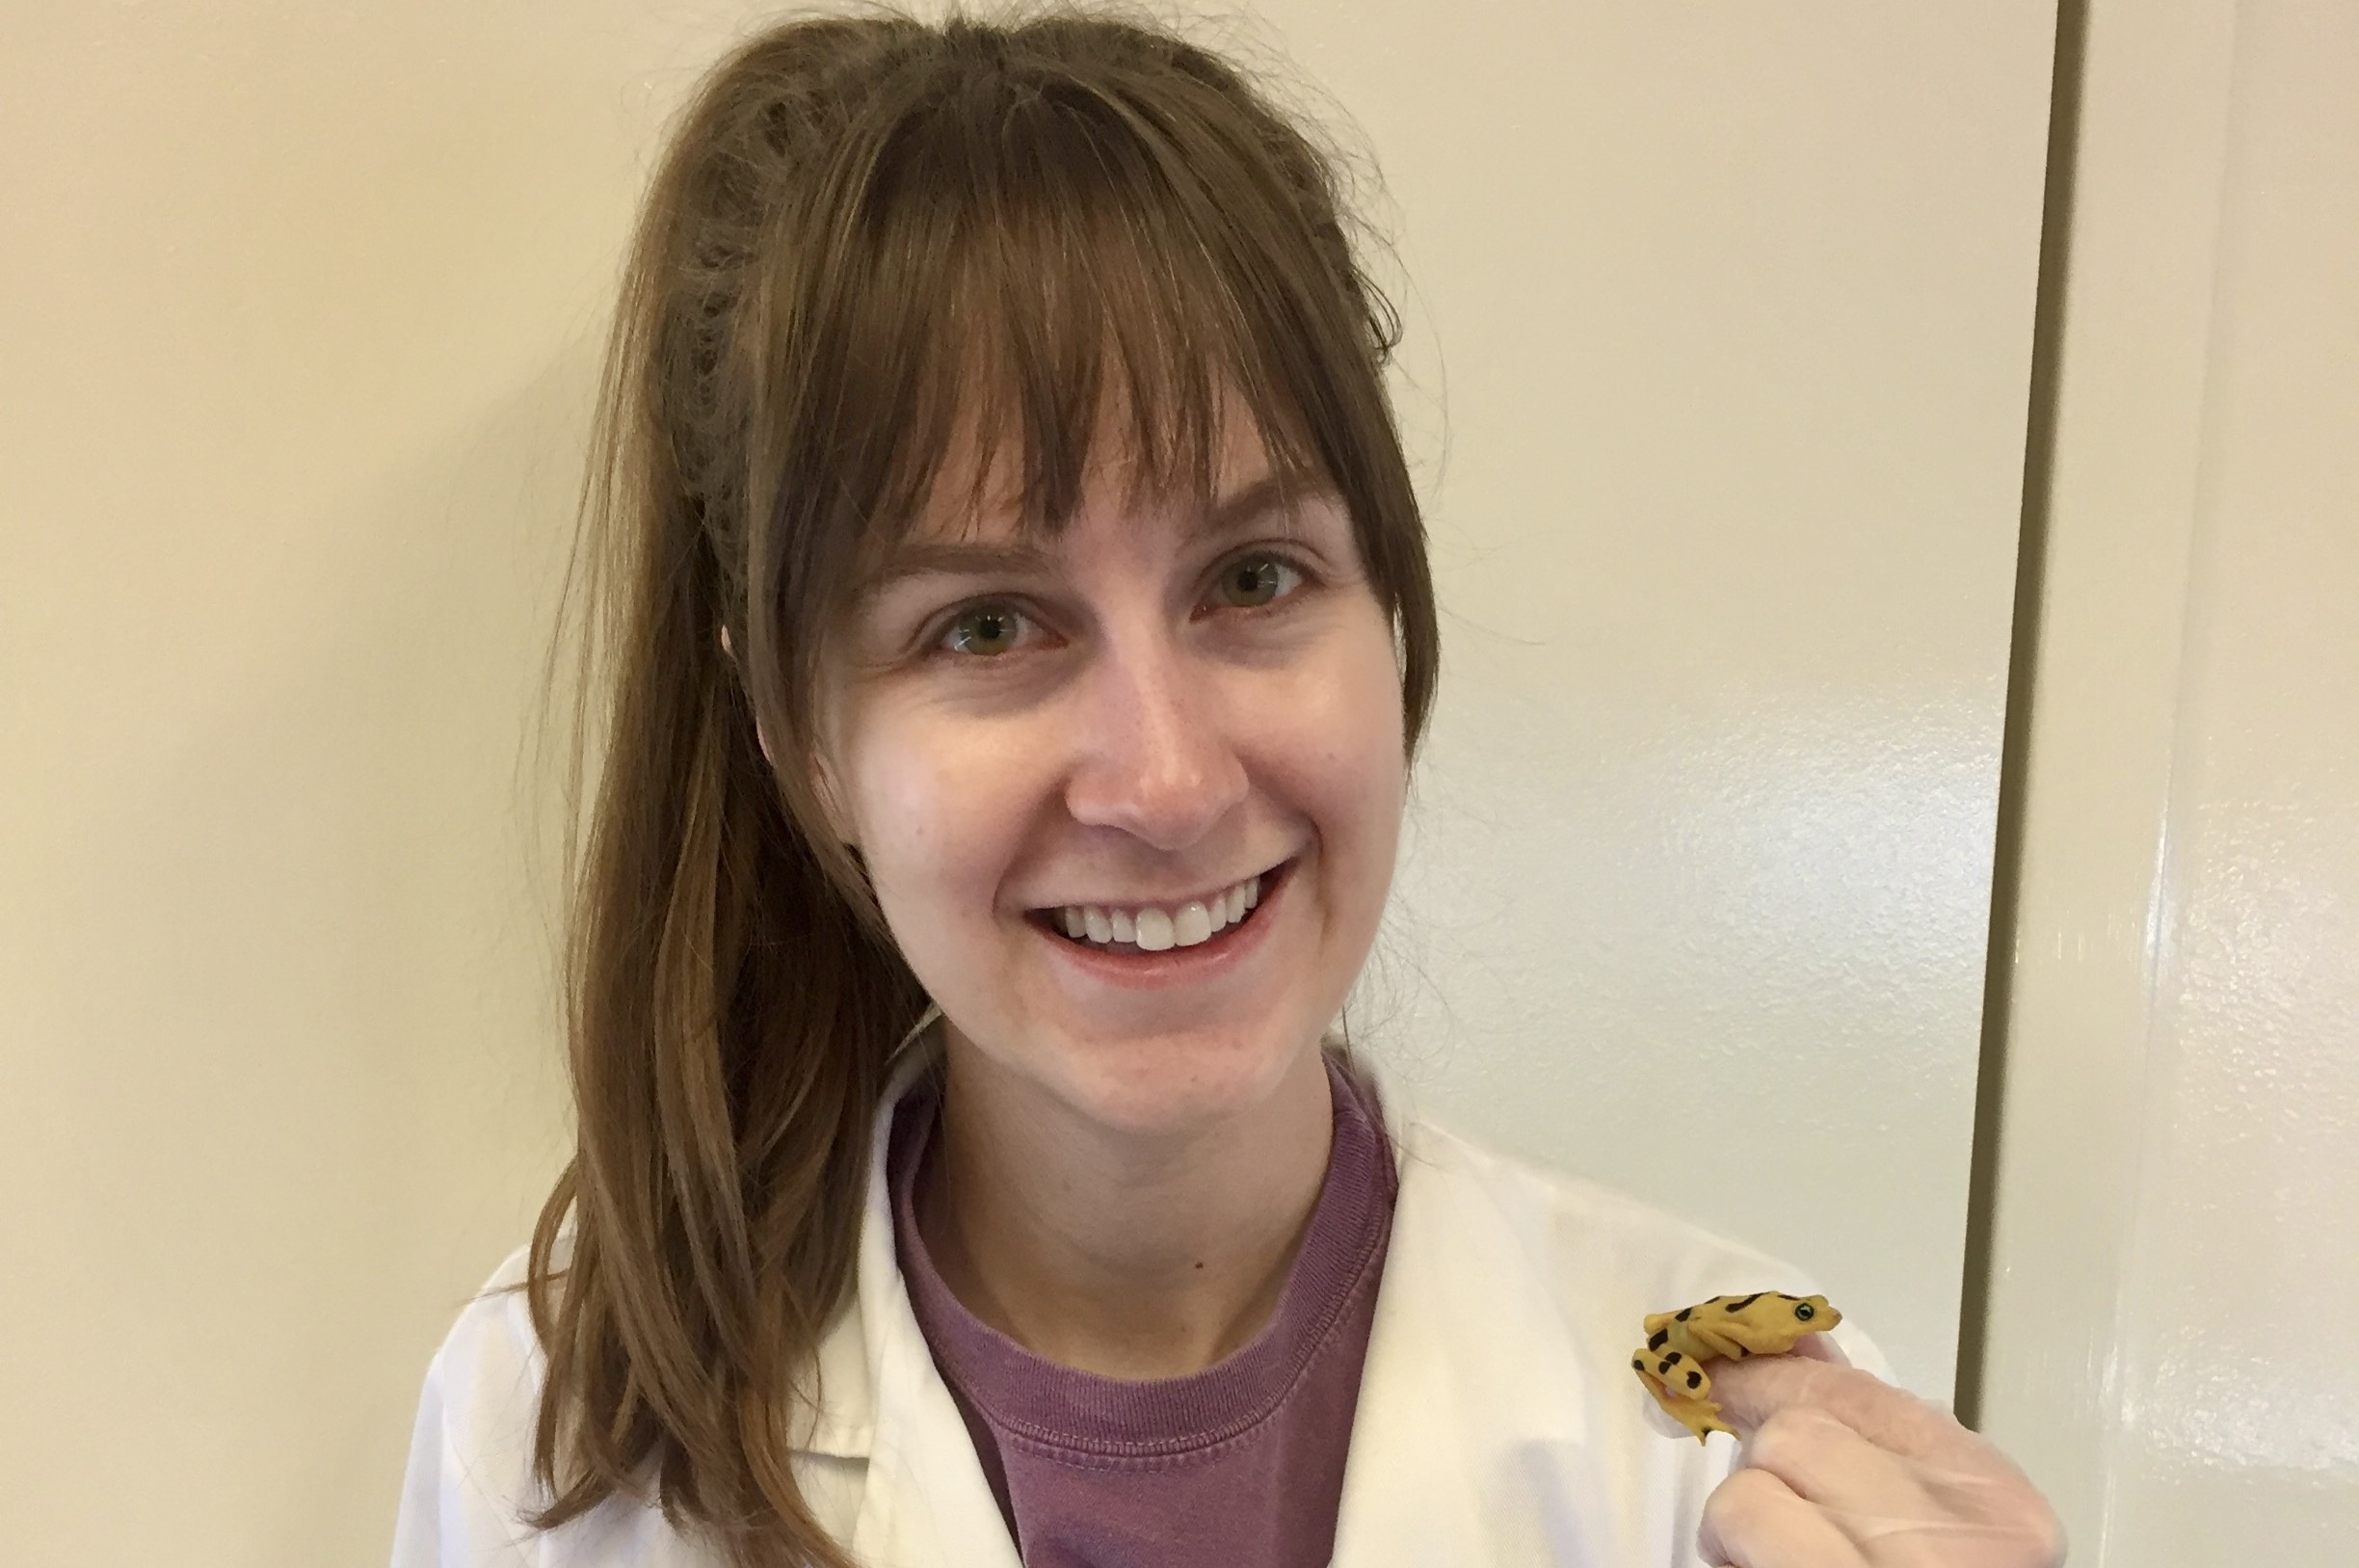 Jordan Gass smiling in a white lab coat, holding a yellow frog with black spots in her left hand.